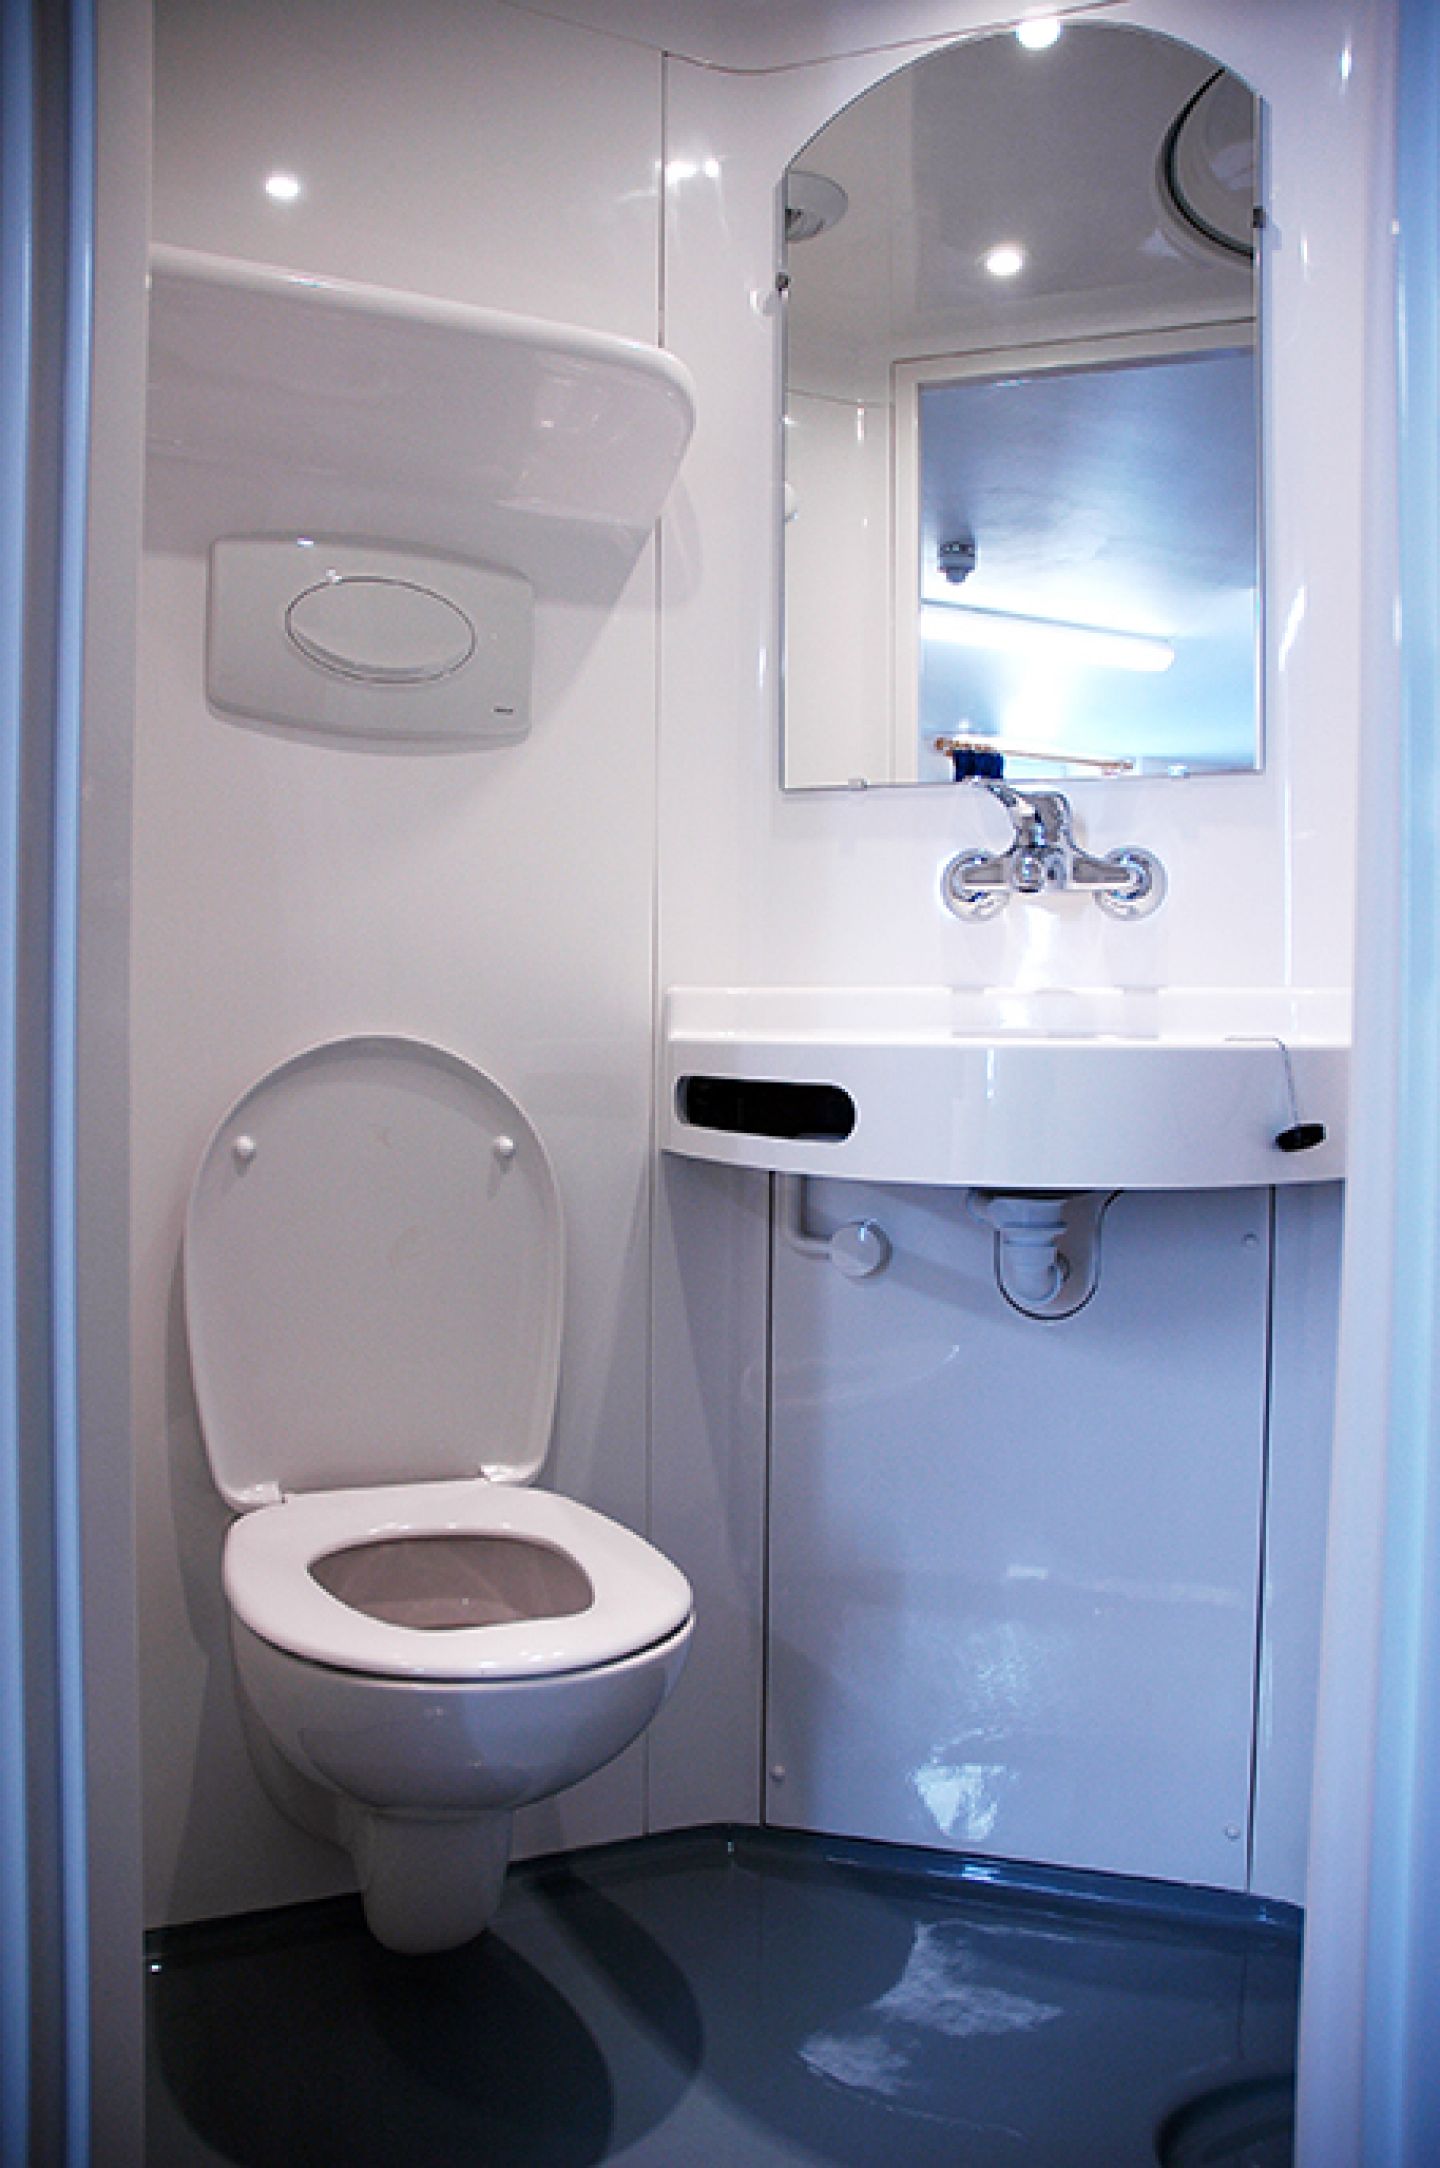 Interior of the en-suite bathroom showing the built-in toilet and sink with a mirror above it, all in clean white.